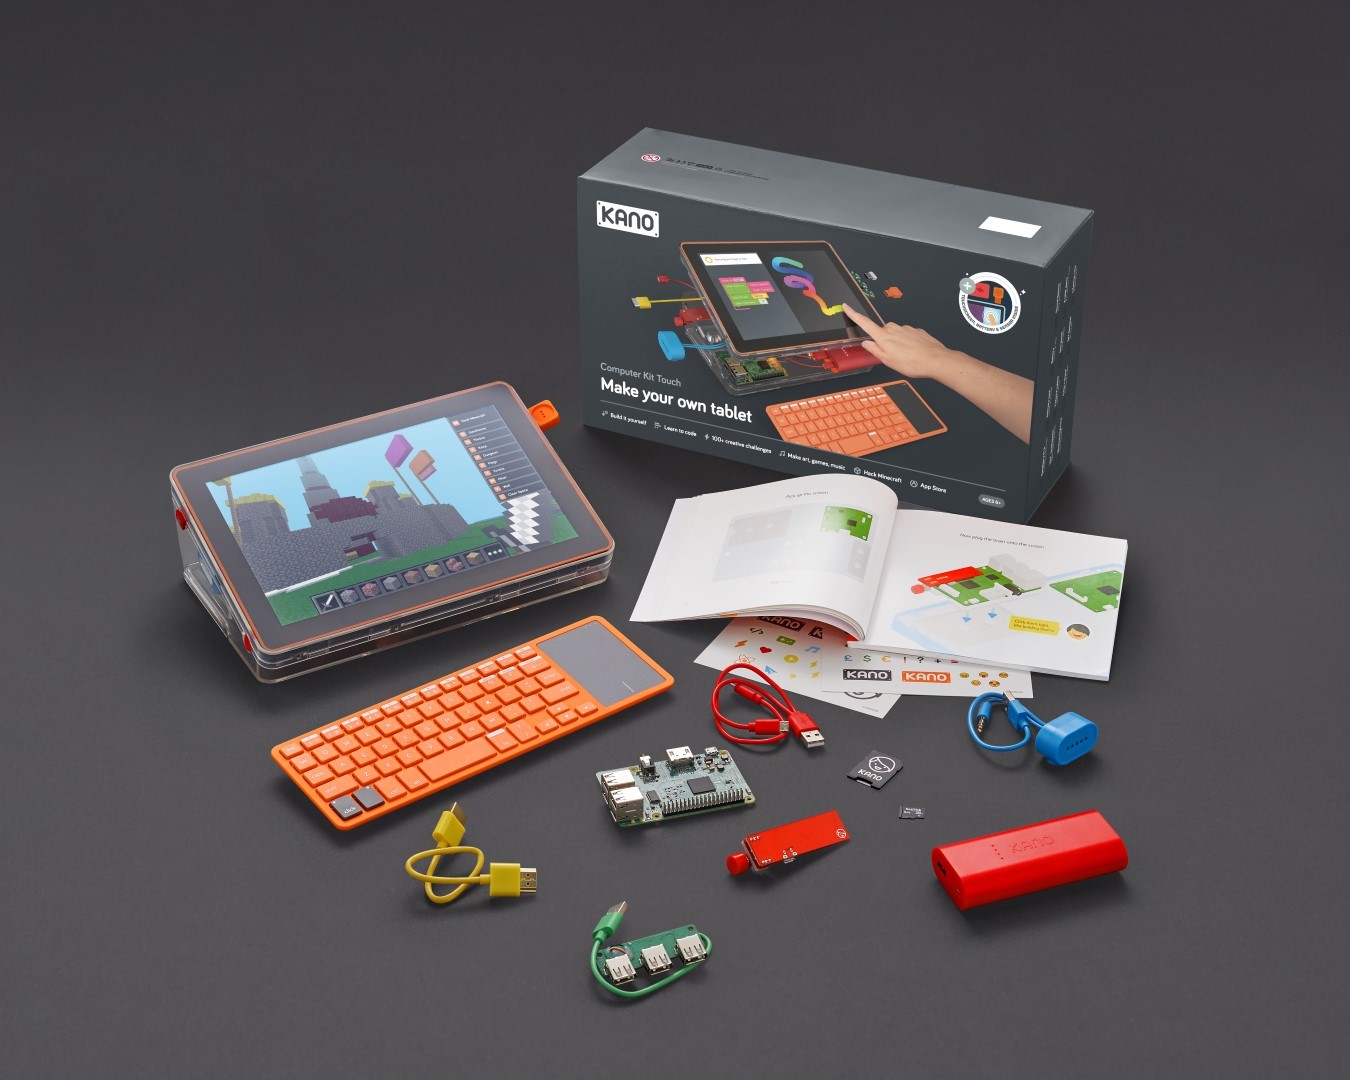 electronic building kits for kids